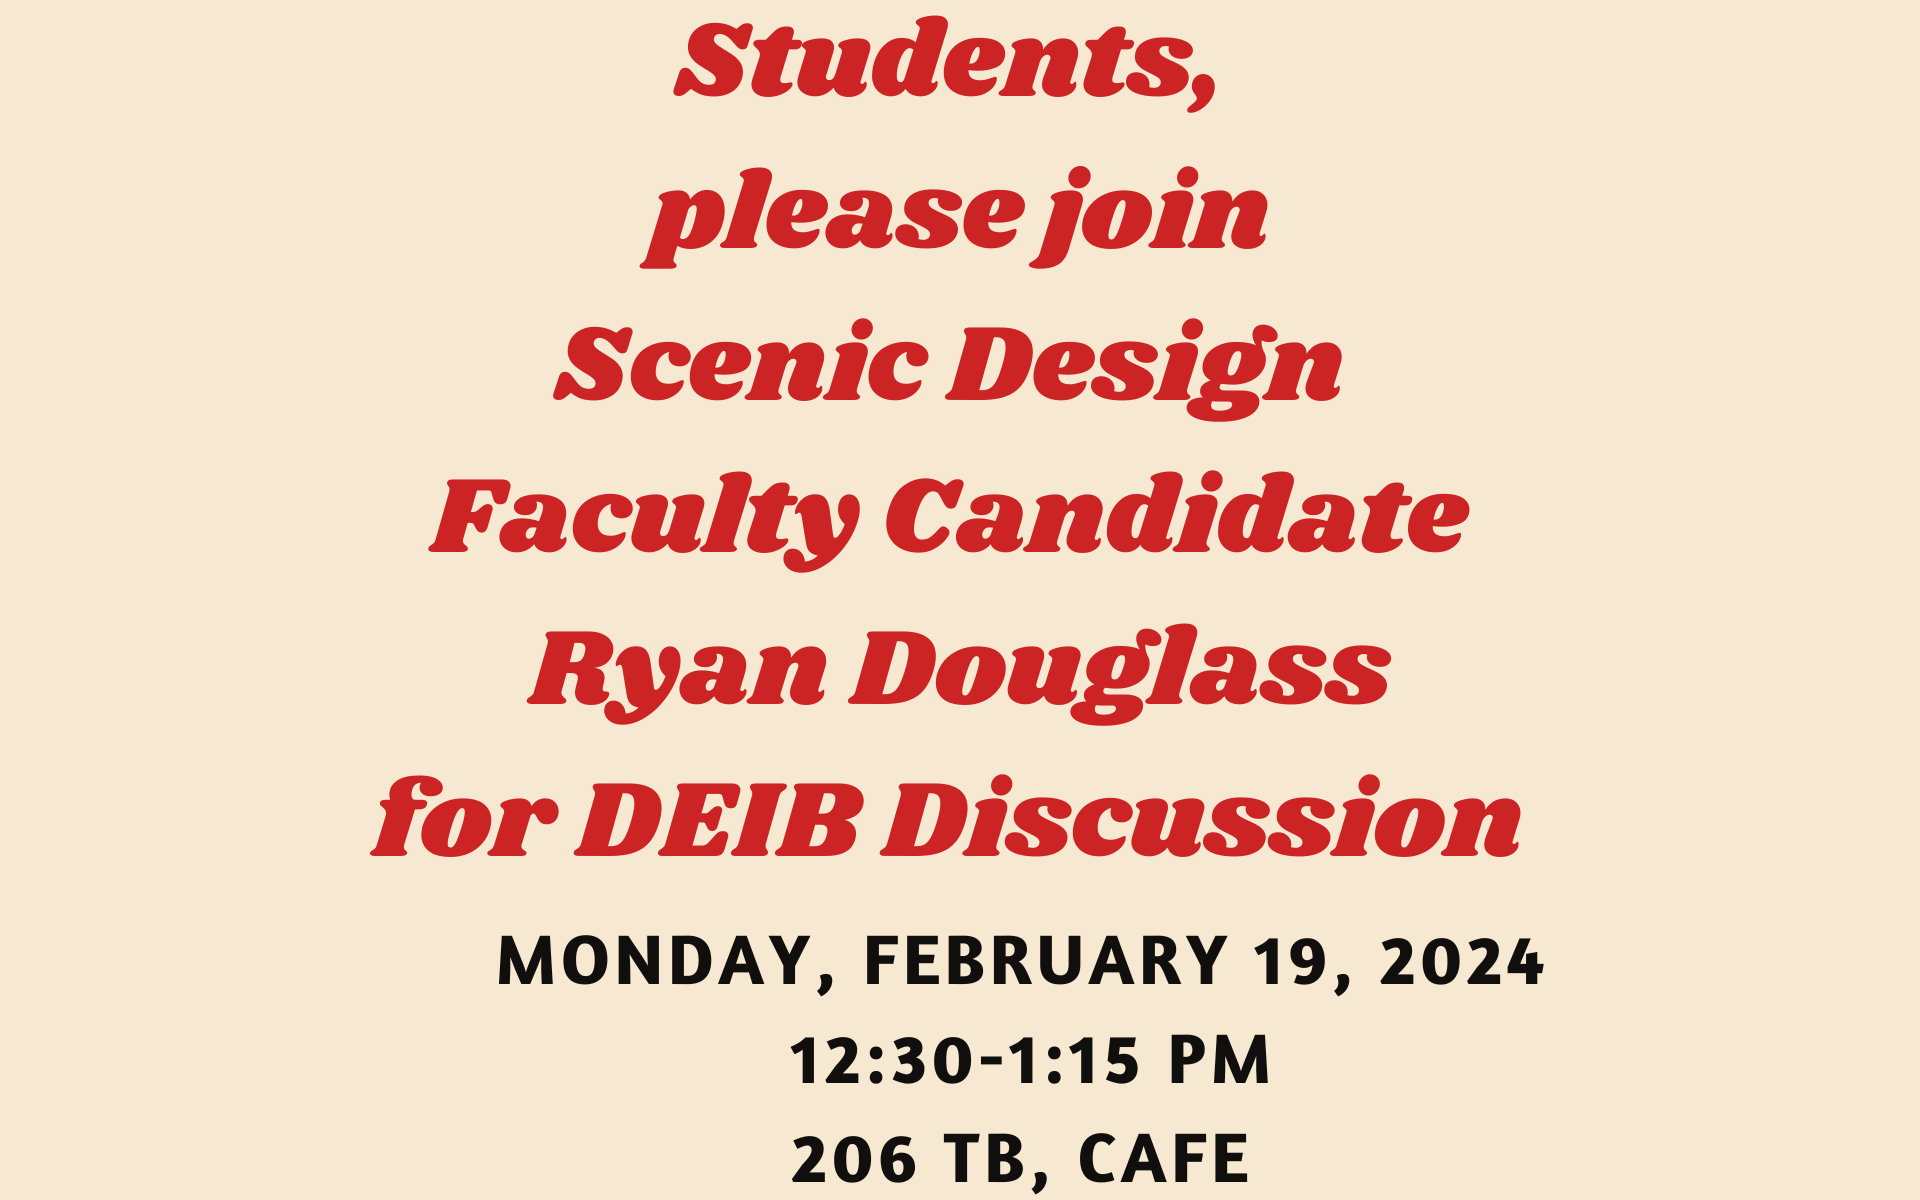 DEIB DIscussion with students and faculty candidate